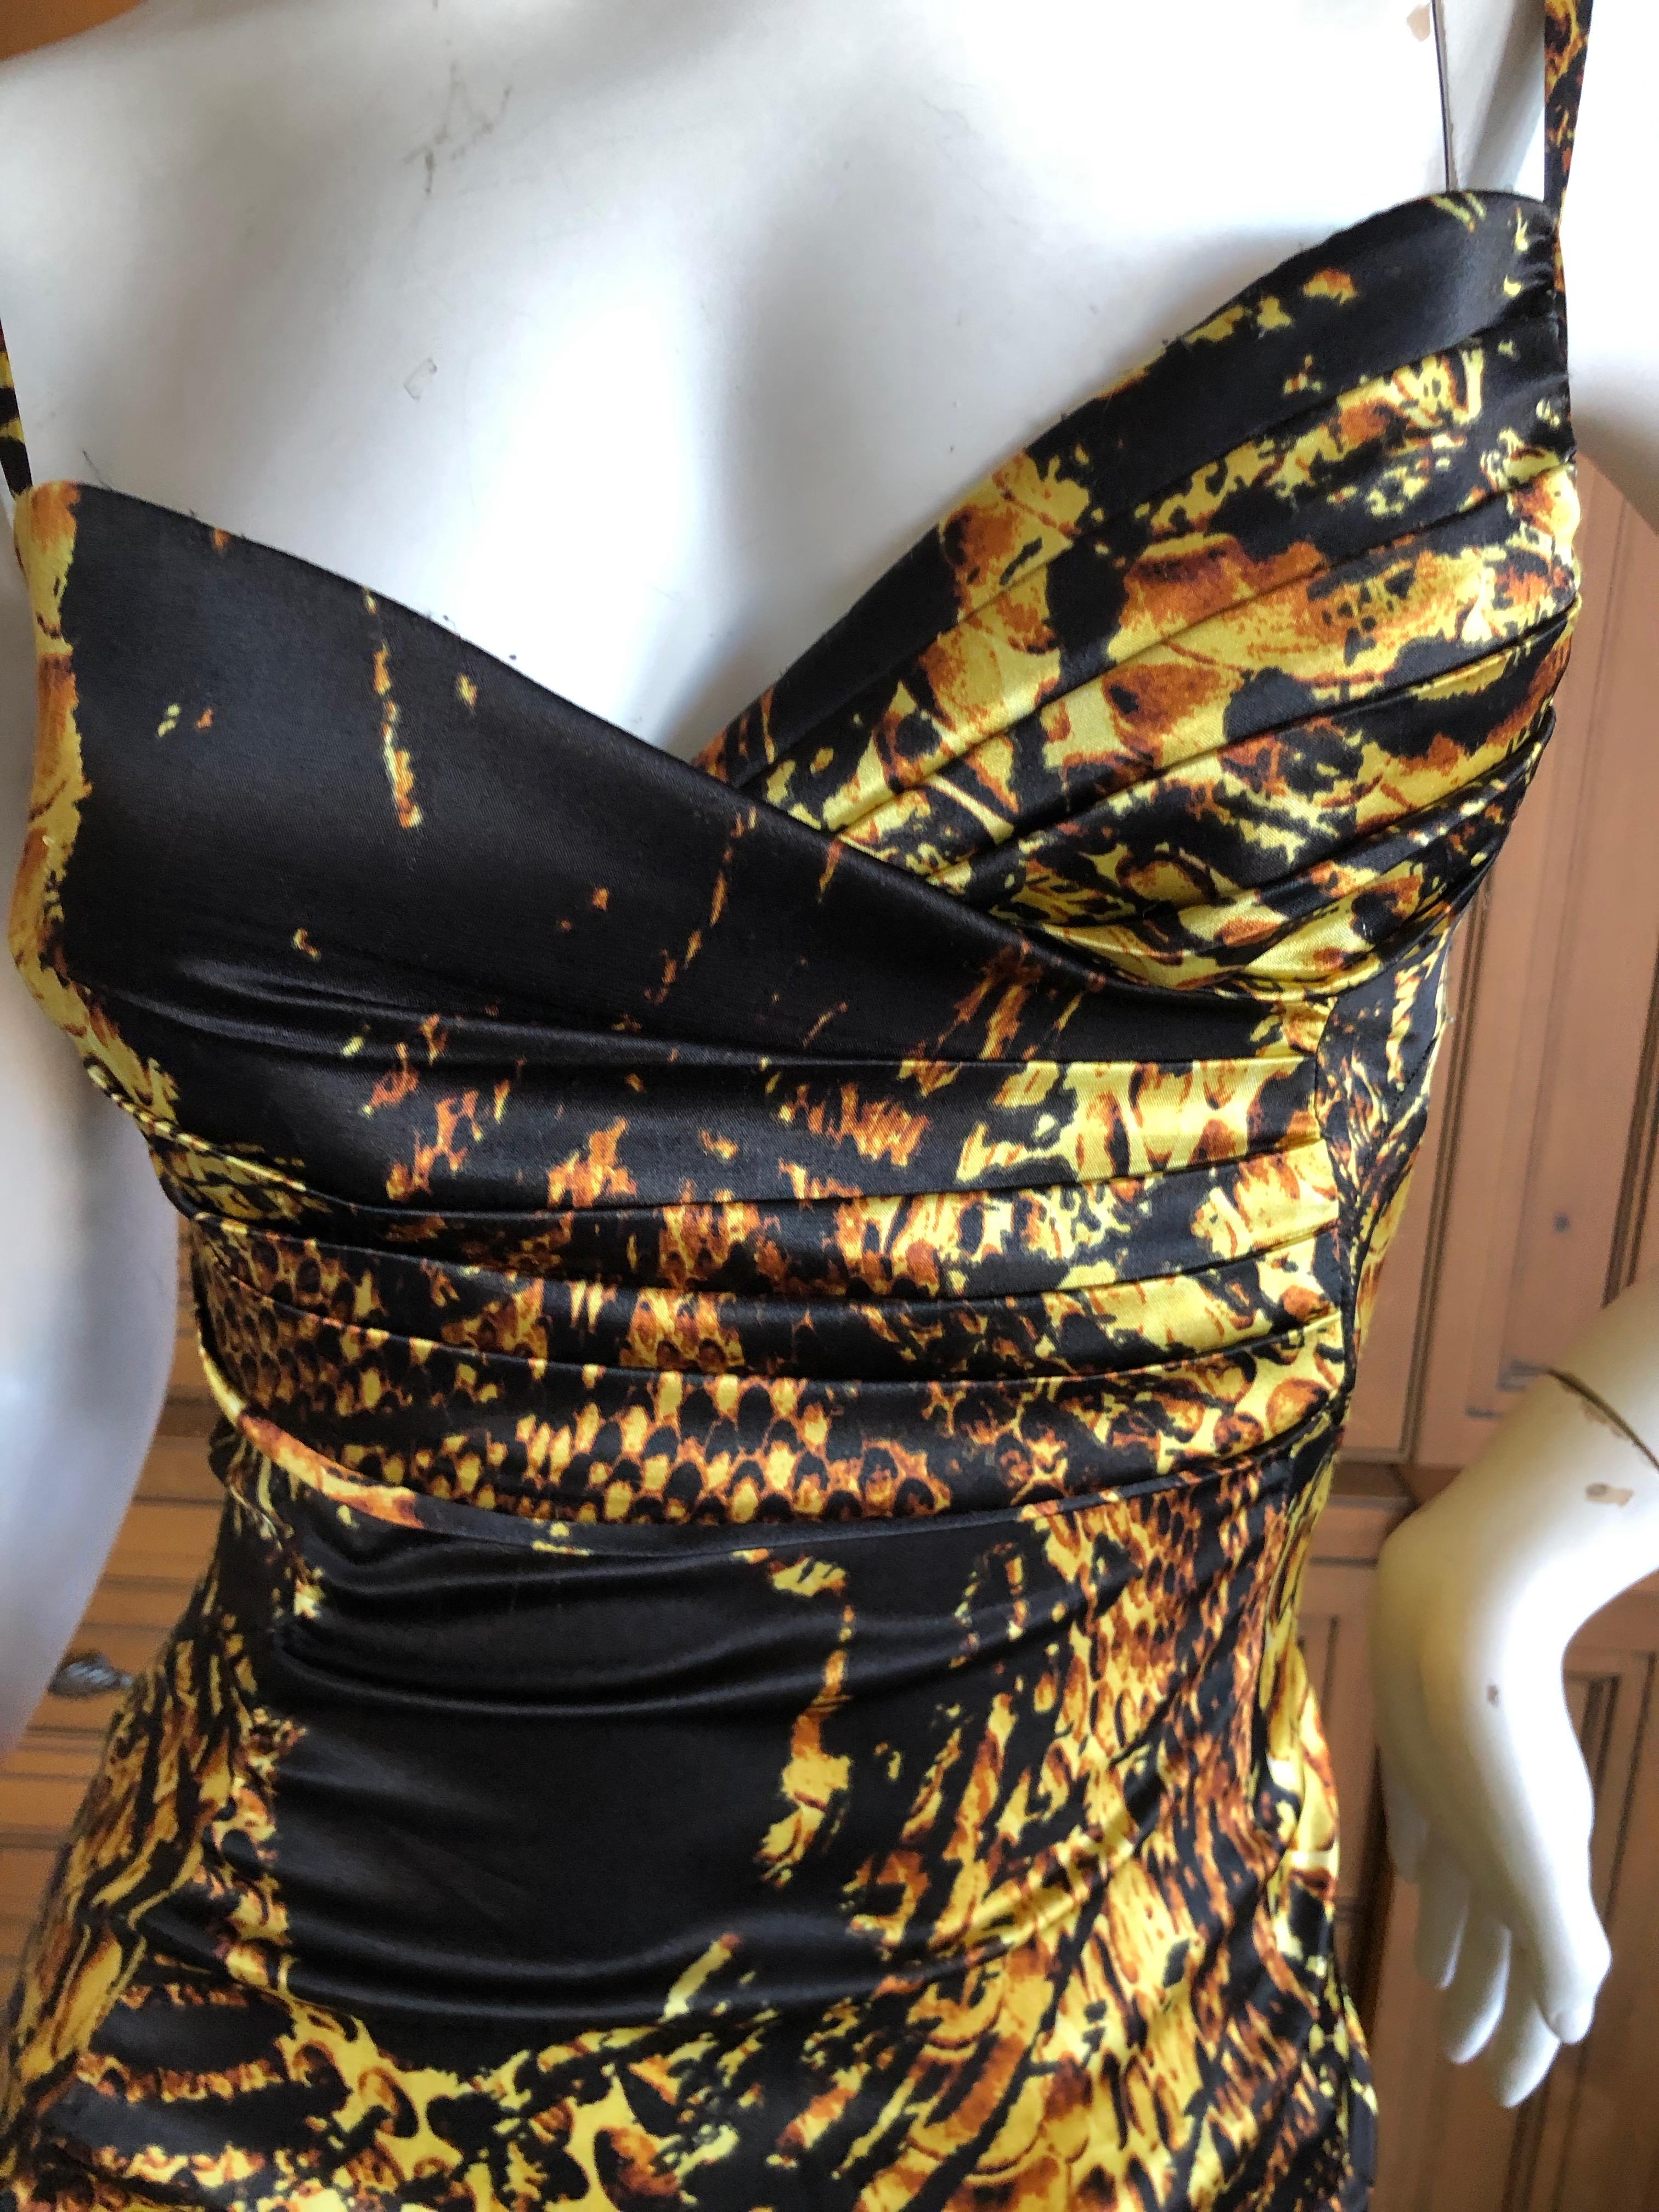 Roberto Cavalli Gold Reptile Print Evening Dress for Just Cavalli In Excellent Condition For Sale In Cloverdale, CA